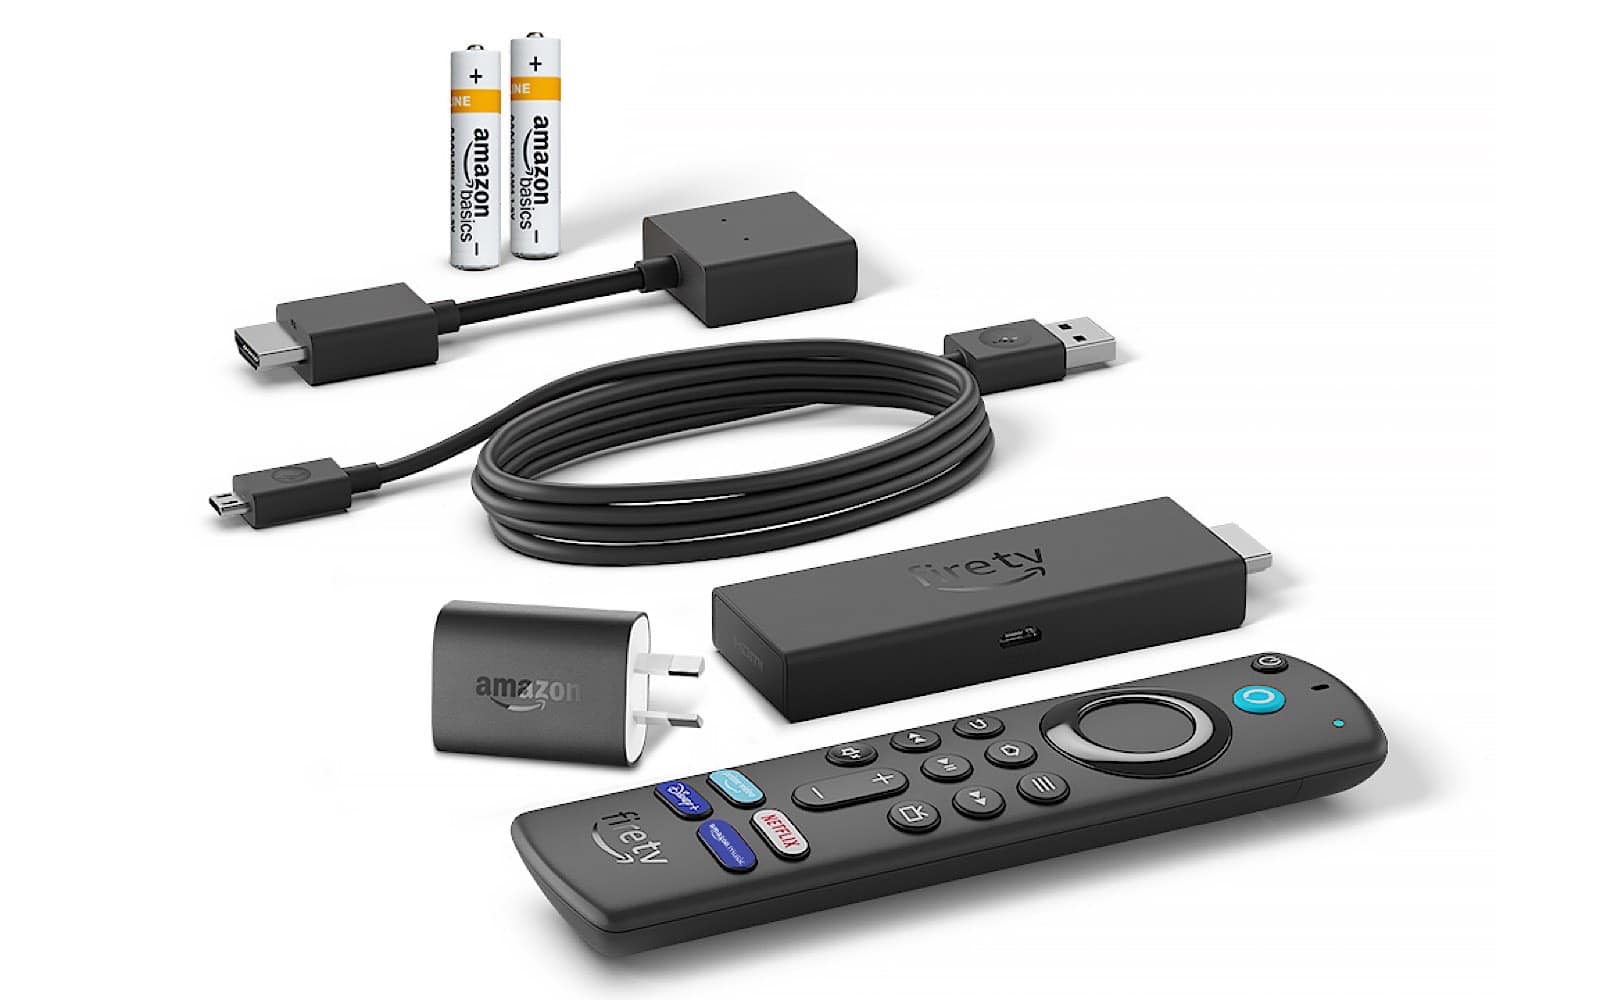 The Fire TV Stick 4K Max package. The remote is bigger than the media dongle.